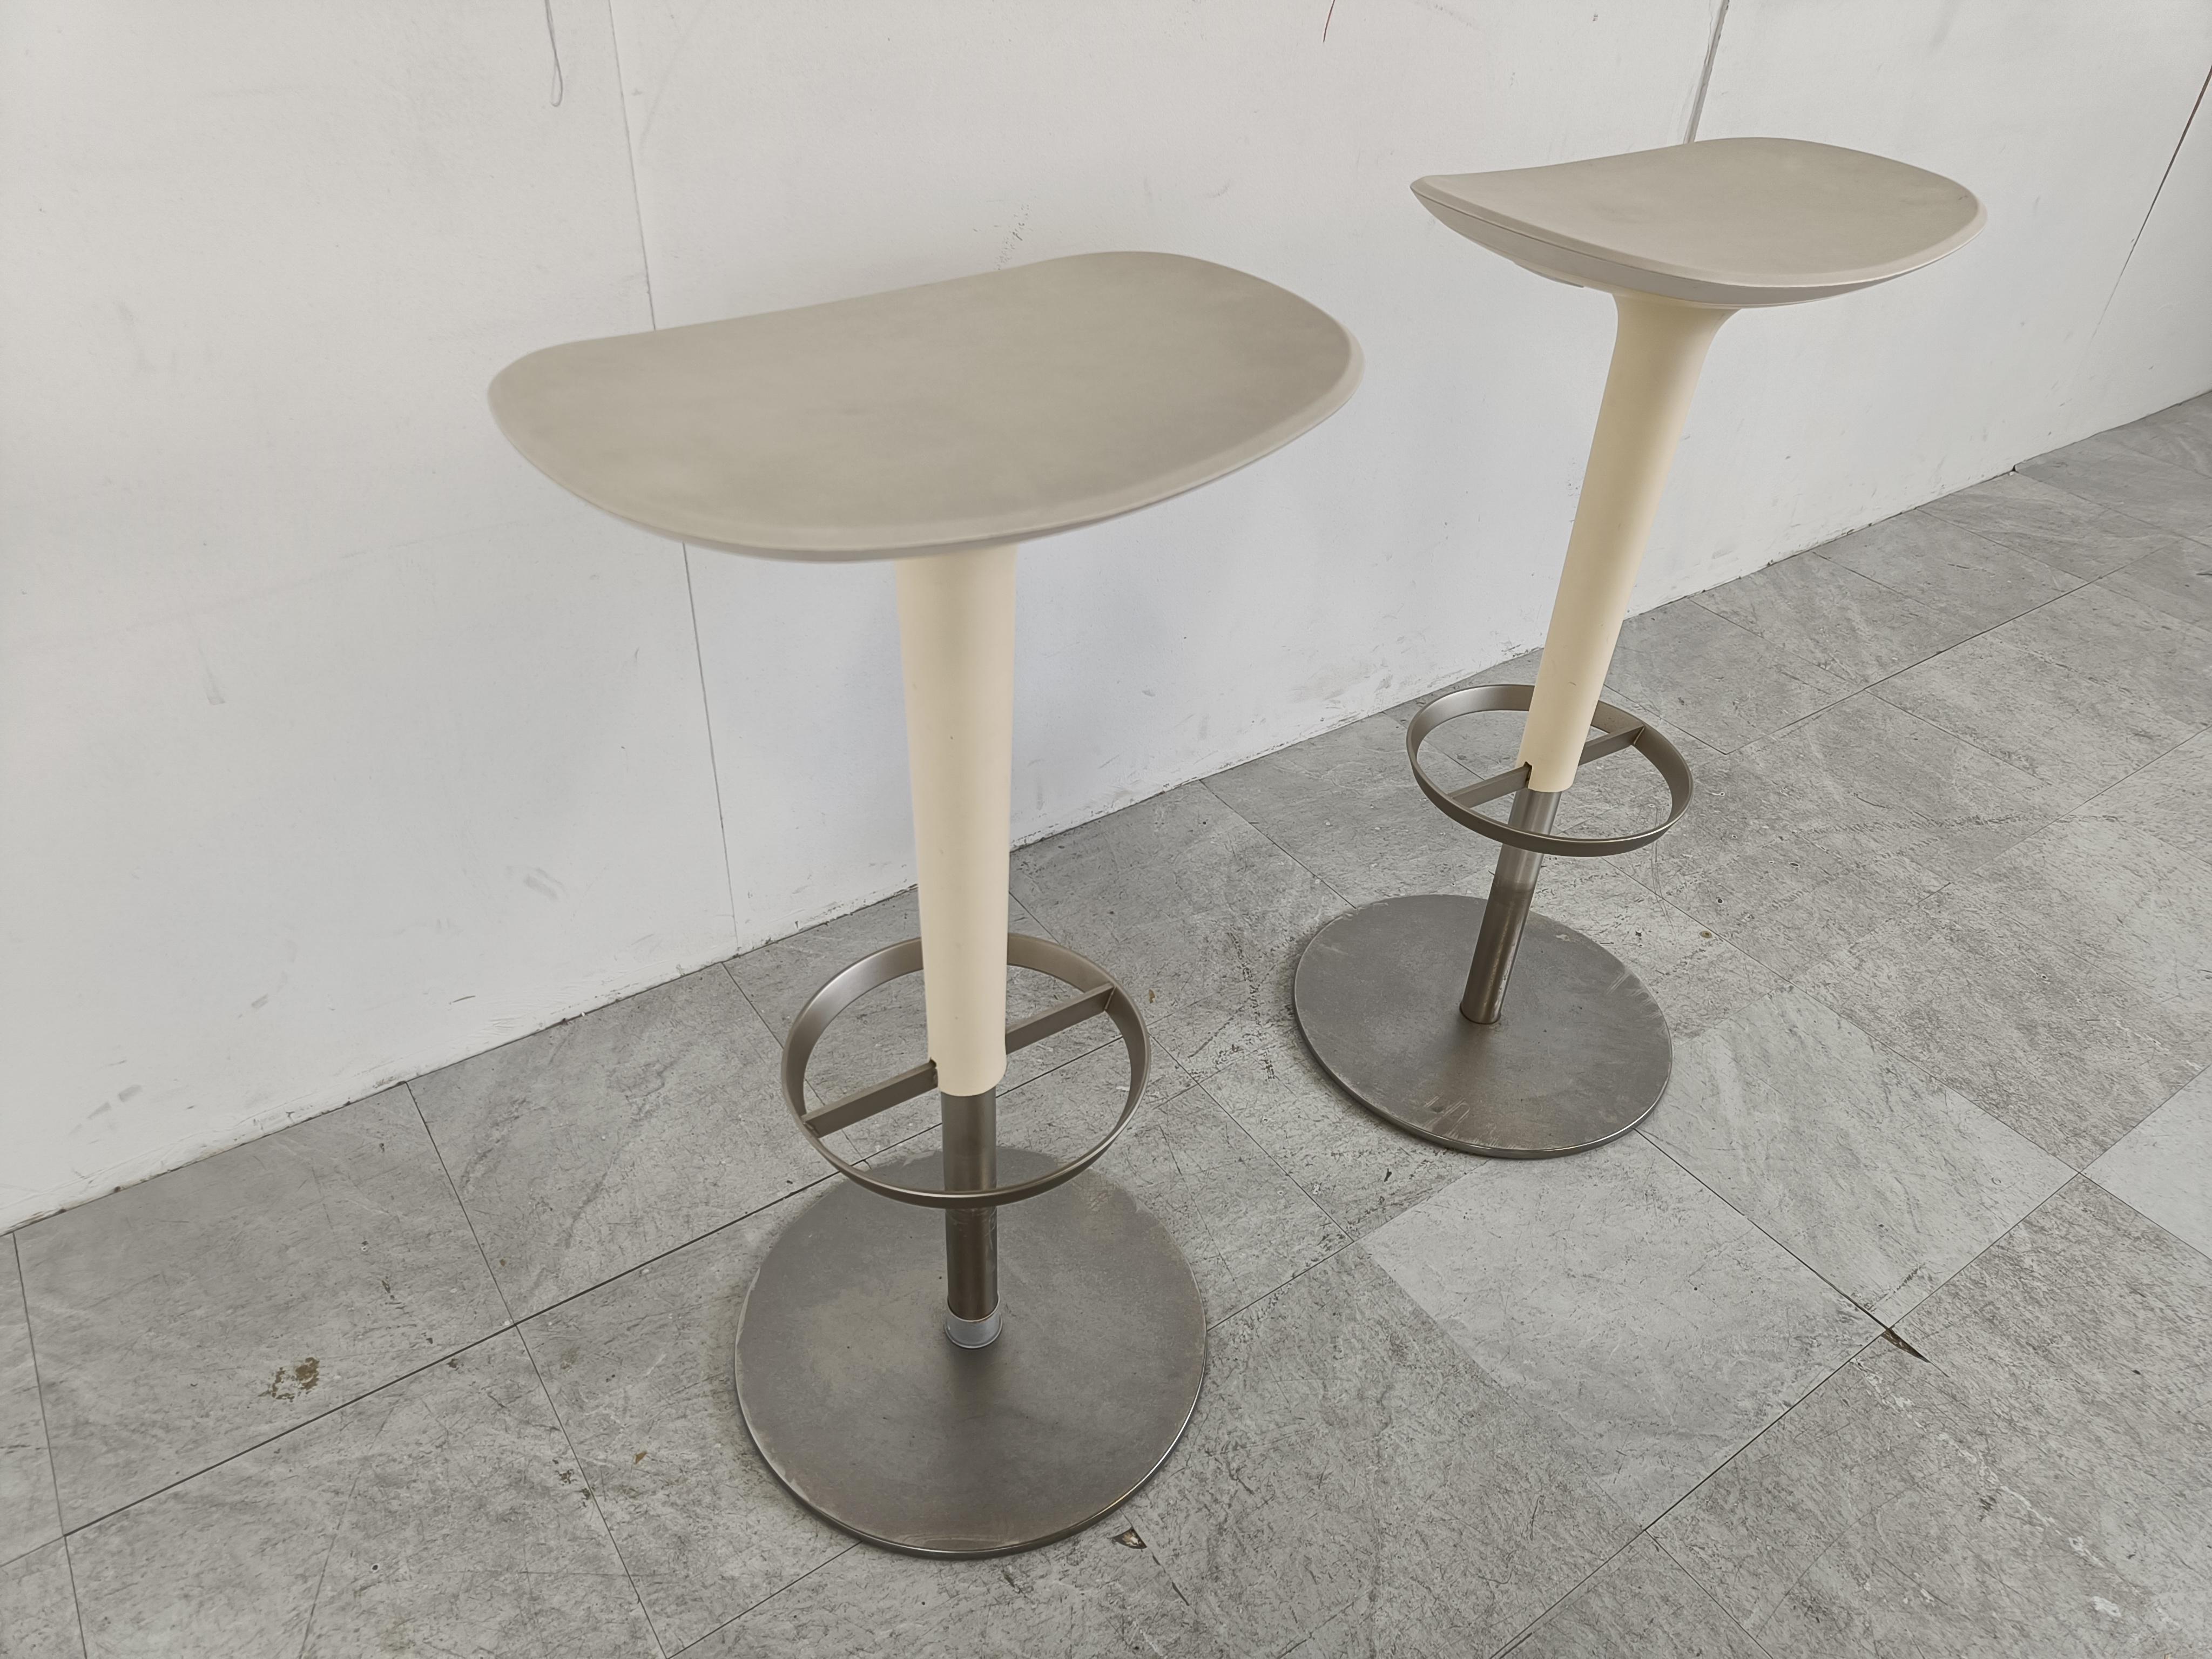 Pair of Arper Bar Stools, 1990s For Sale 2